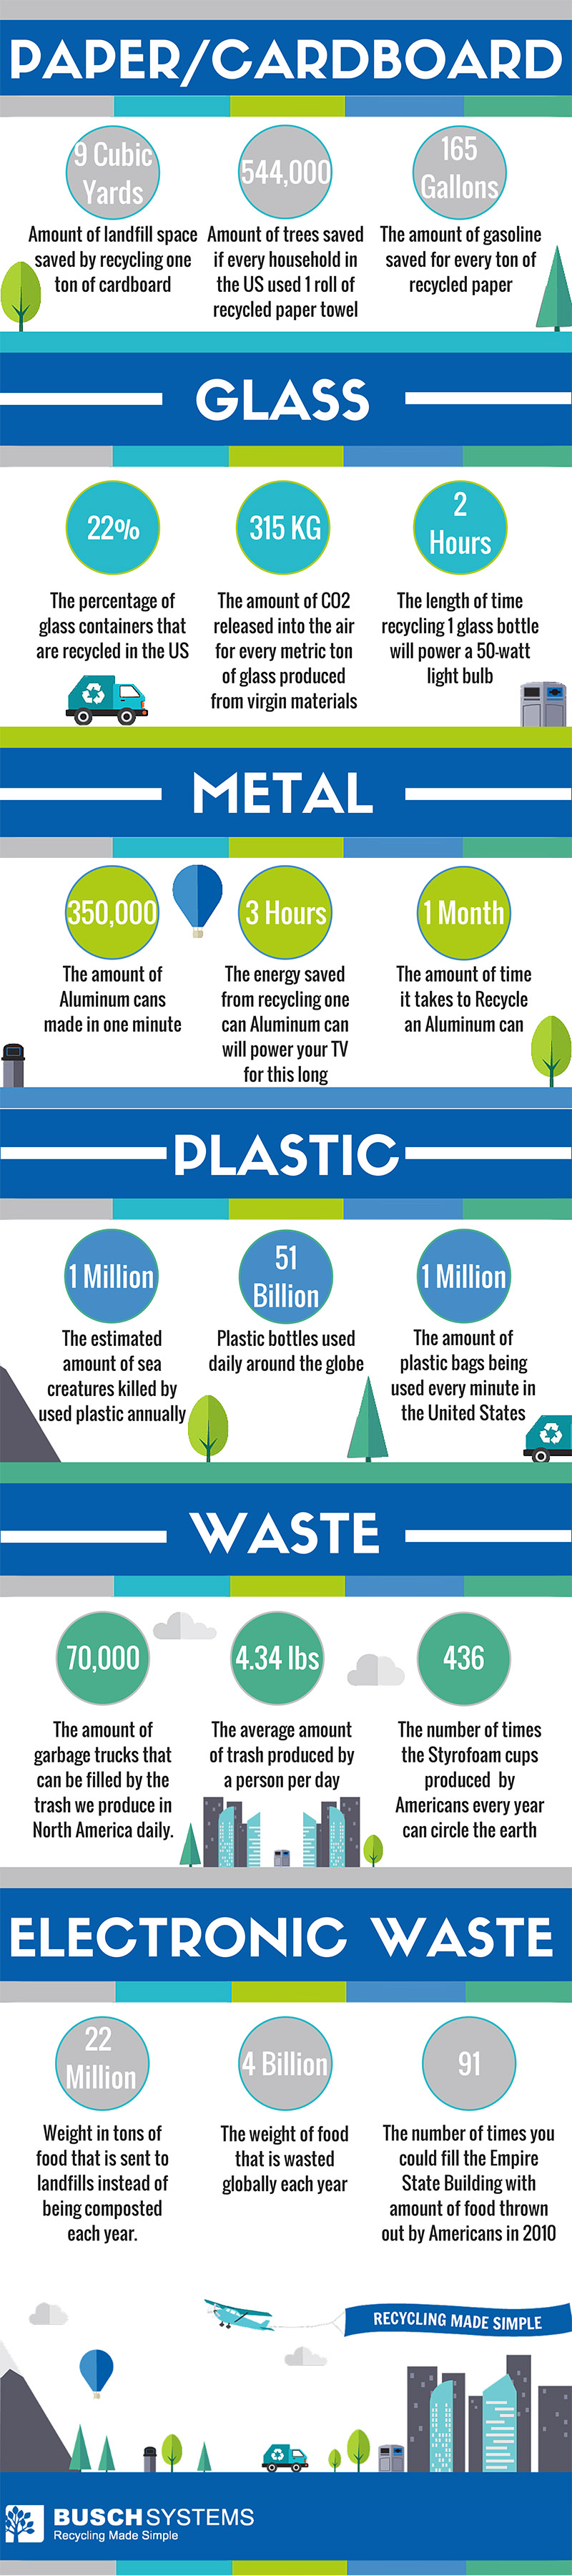 Recycling by the Numbers